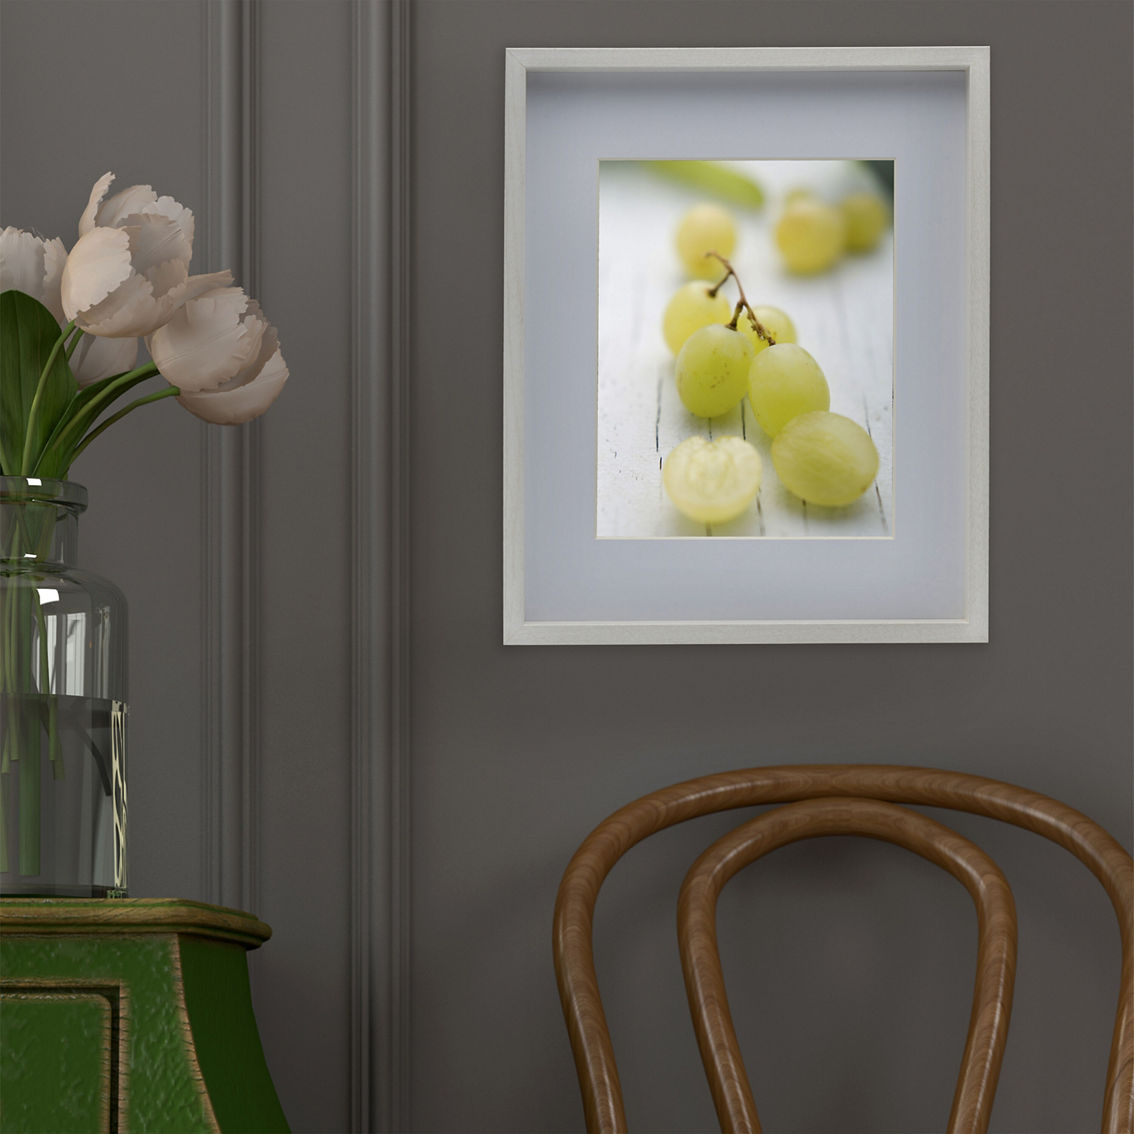 Mikasa Home White Gallery Frame - Image 3 of 6